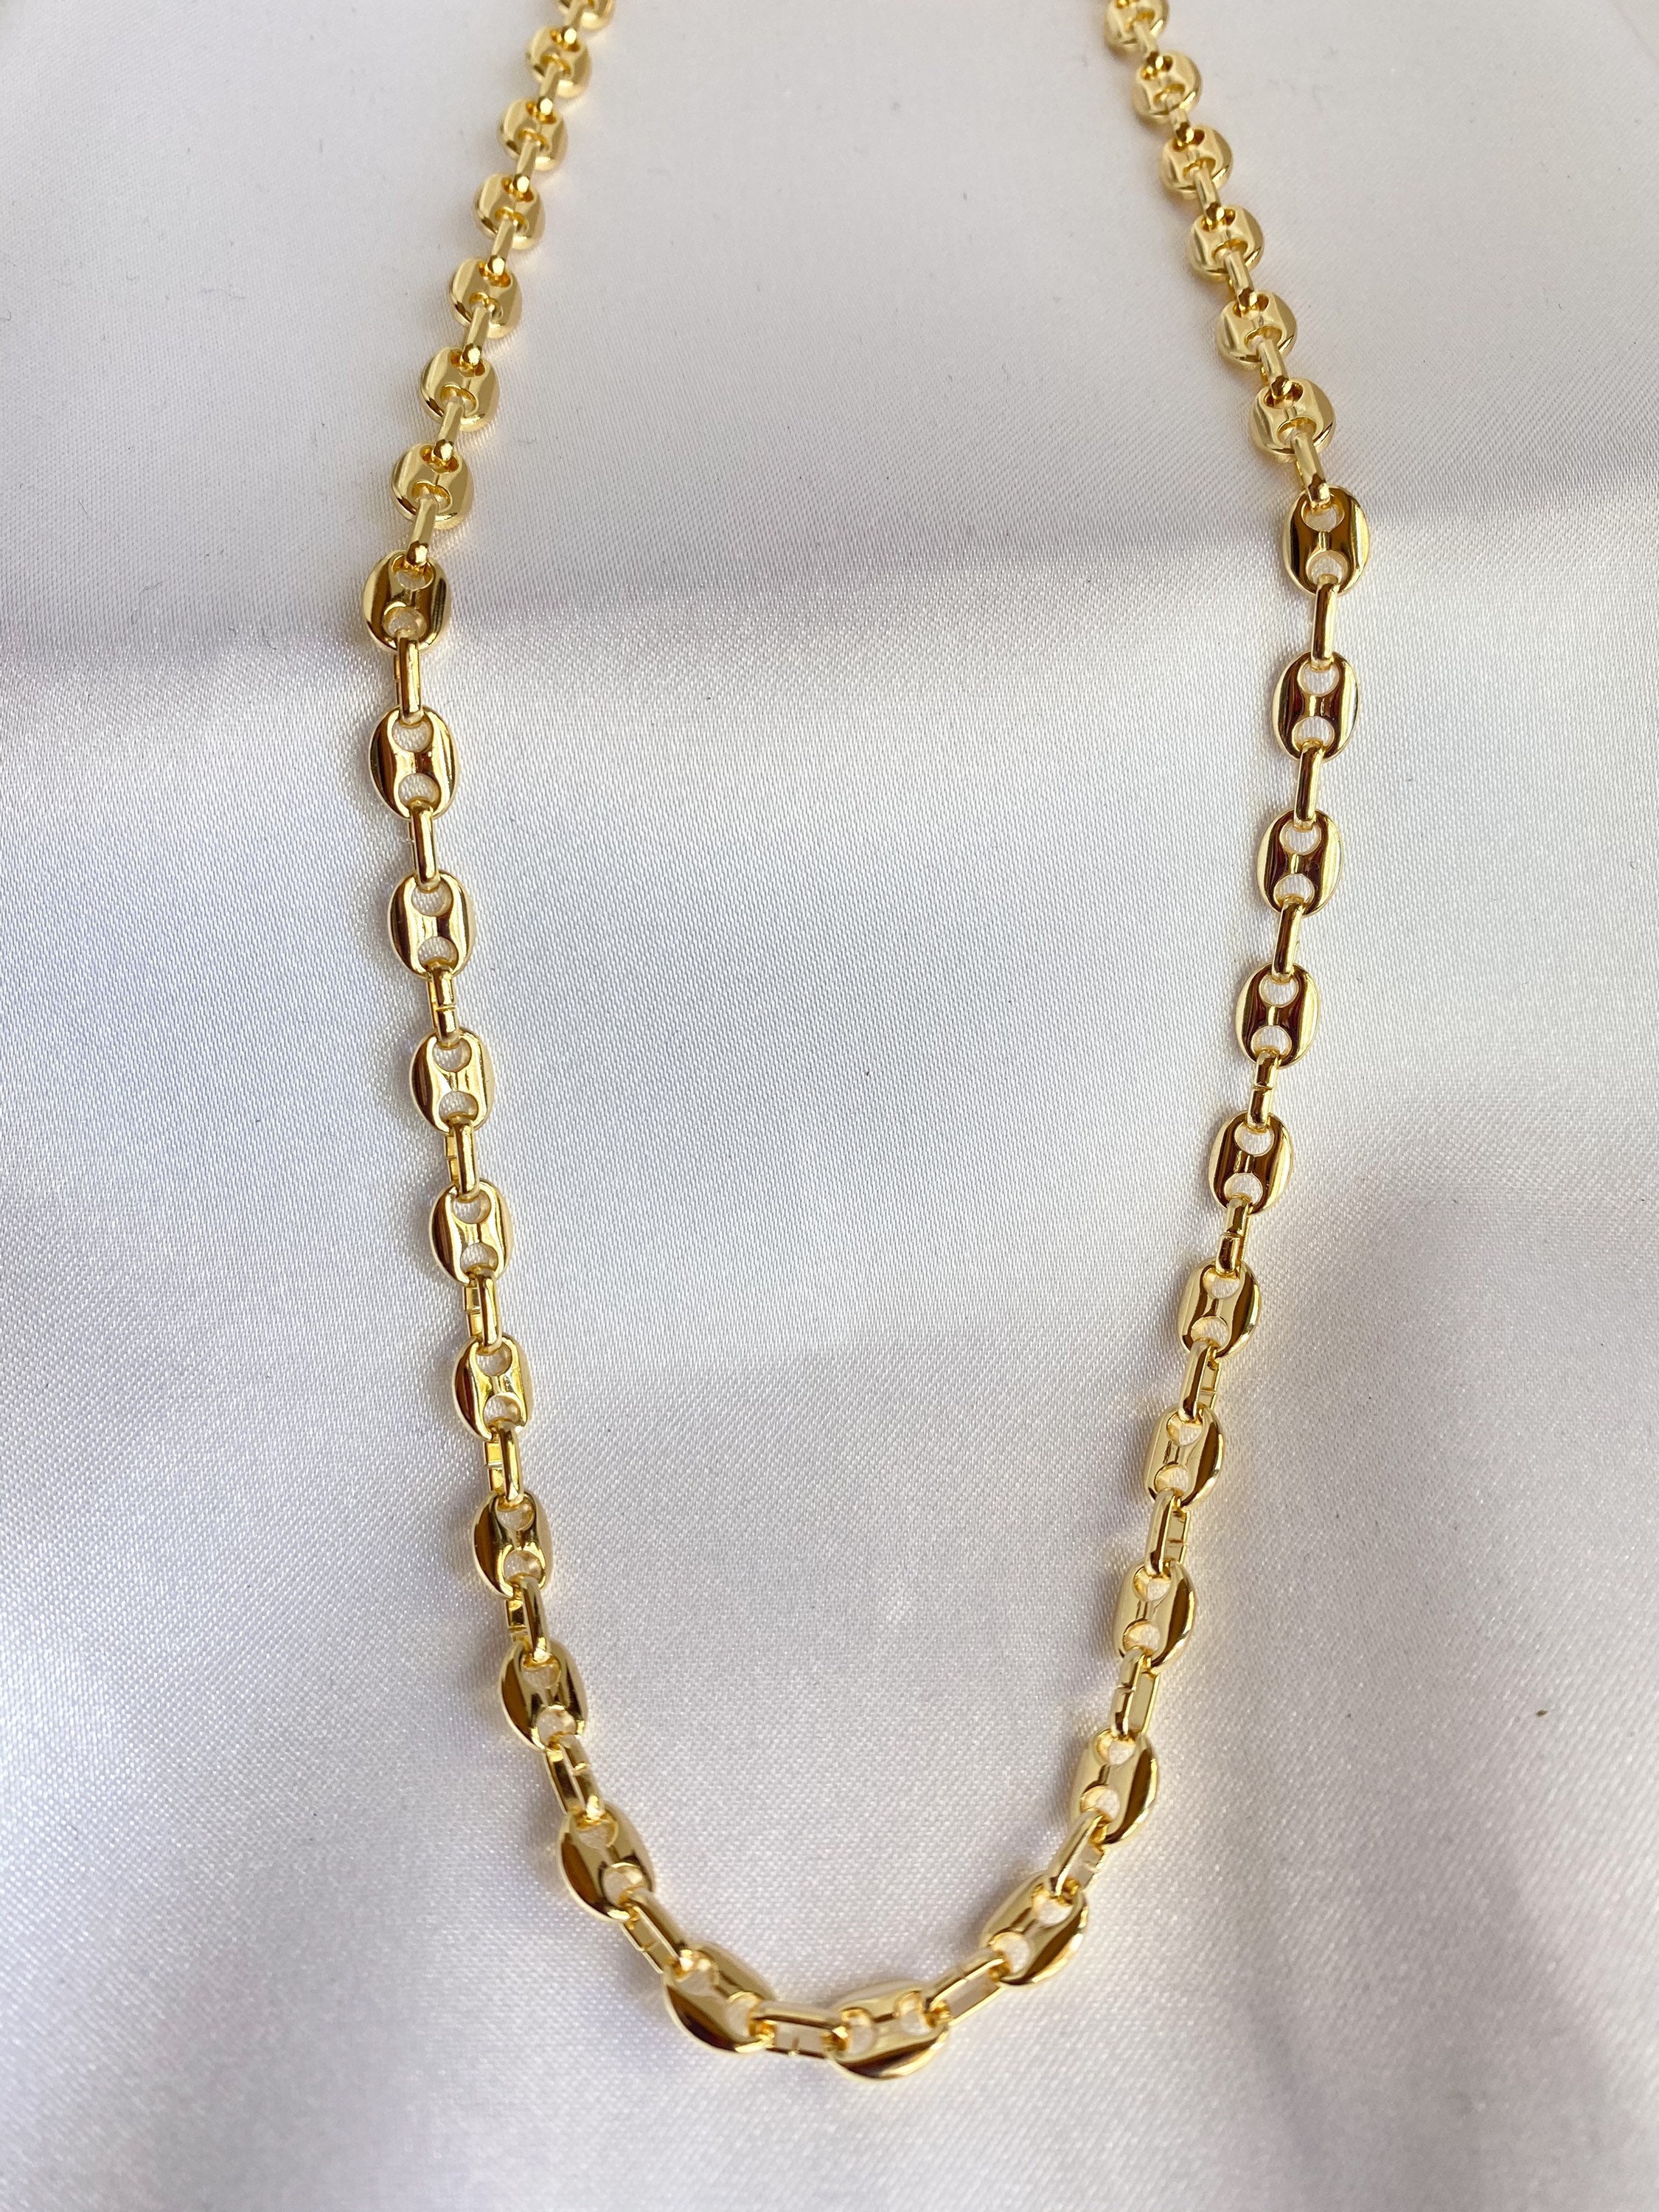 Gucci Puff Layer necklace 18k Gold Filled Chain Mariner | Etsy